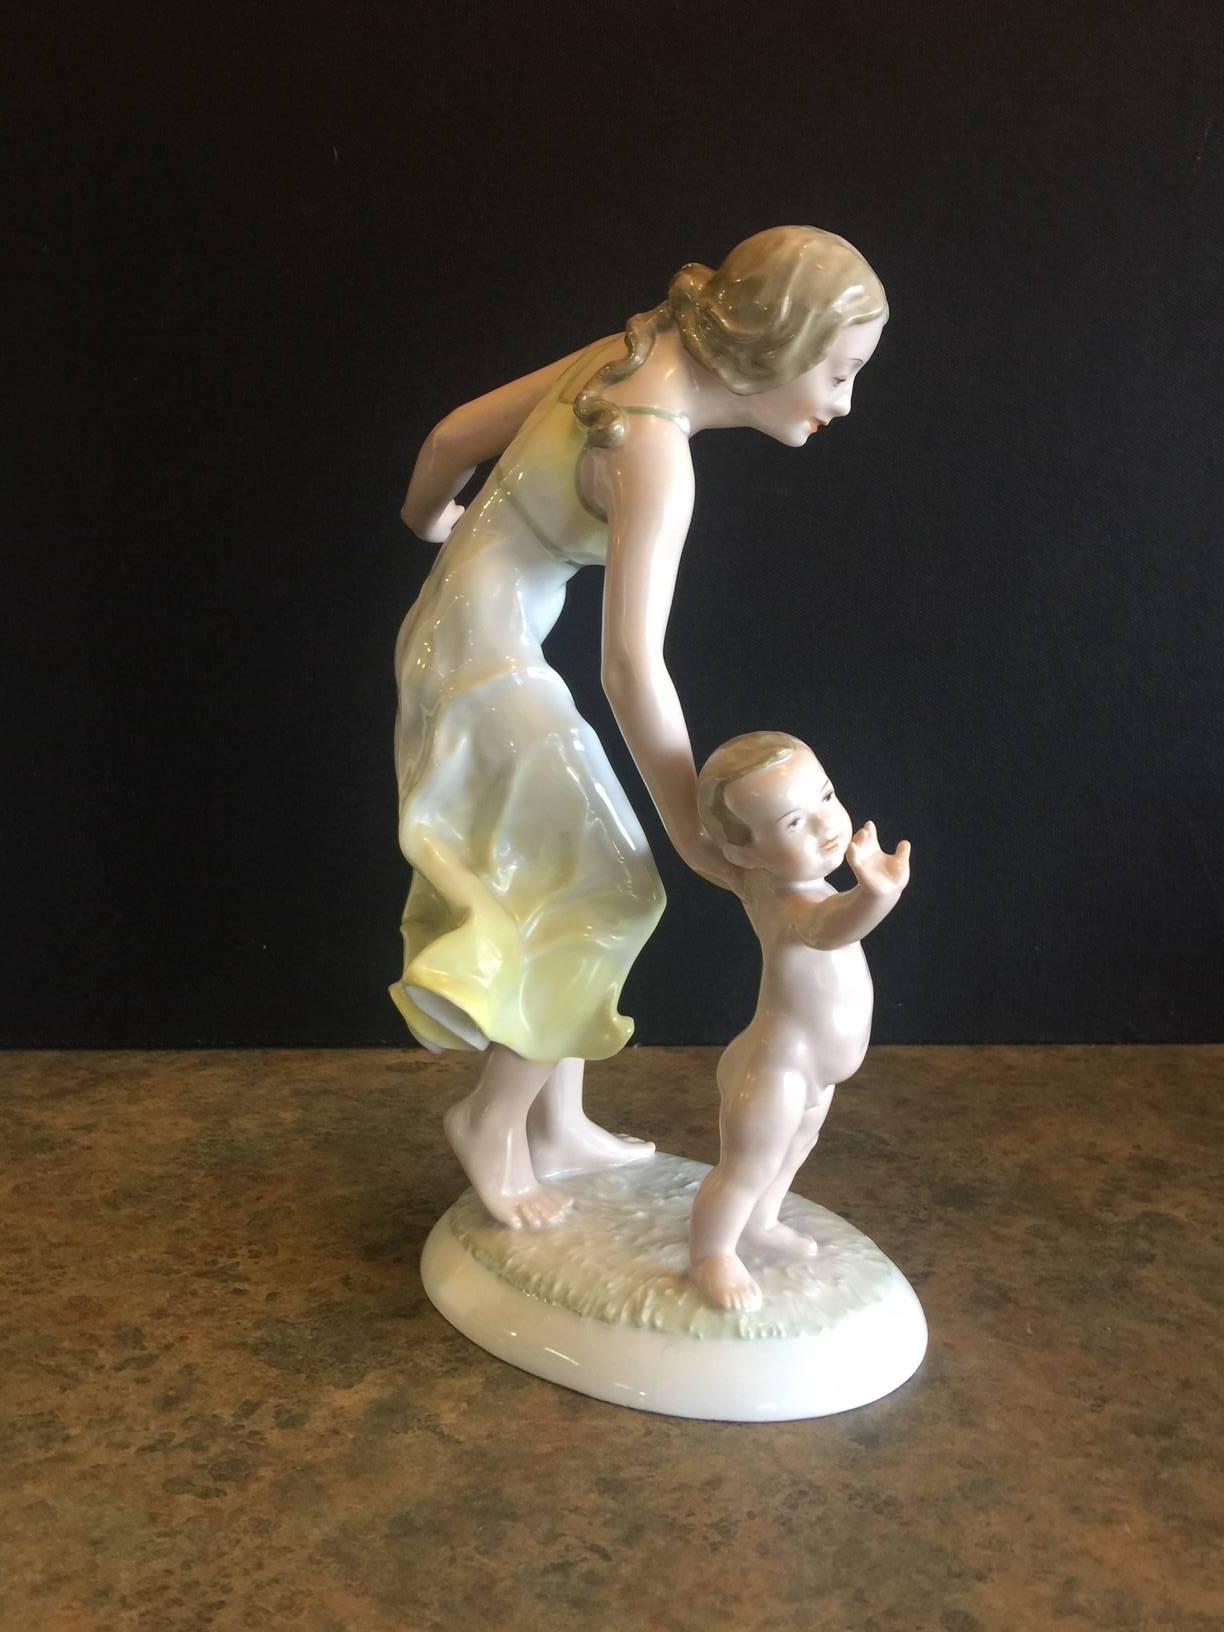 Hand-Painted Vintage Mother & Child Porcelain Figurine by Hutschenruether Rare U.S. Zone